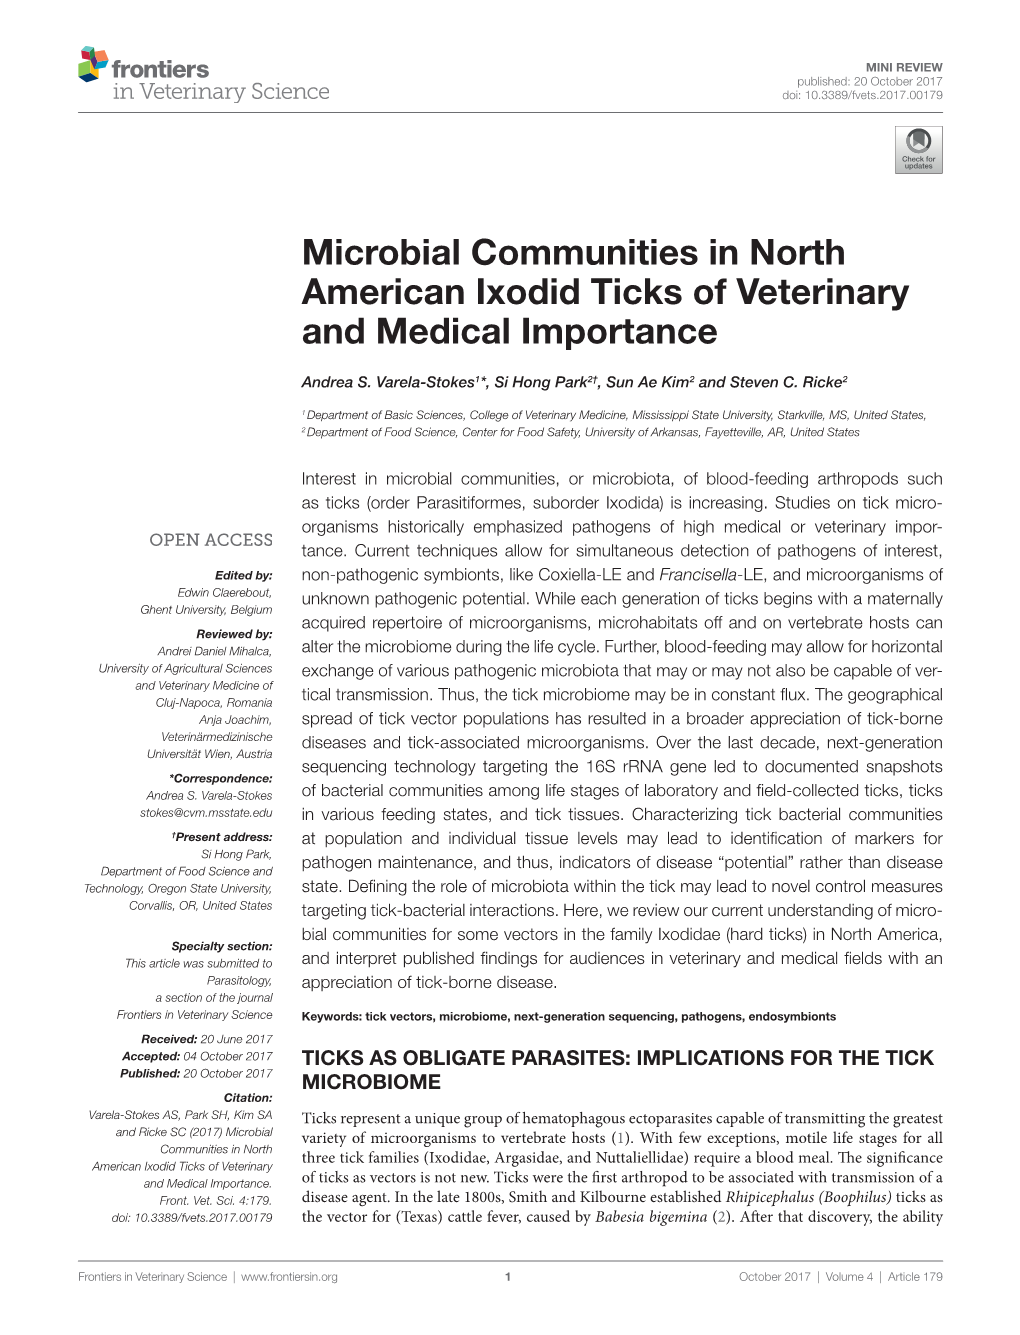 Microbial Communities in North American Ixodid Ticks of Veterinary and Medical Importance